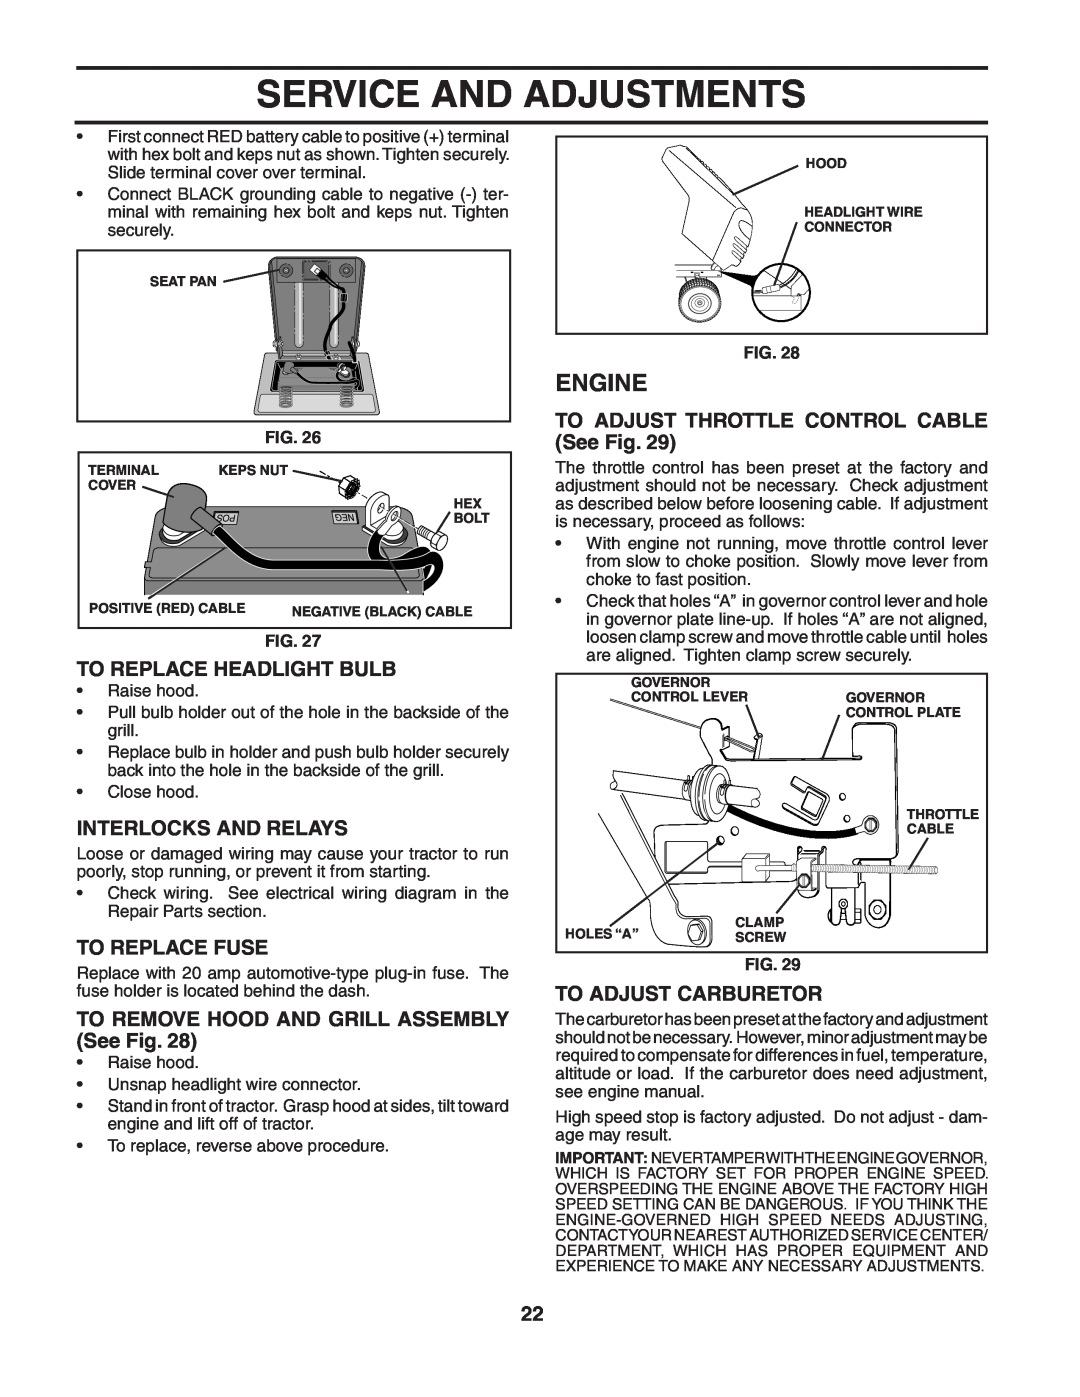 Poulan PO1742STB manual To Replace Headlight Bulb, Interlocks And Relays, To Replace Fuse, To Adjust Carburetor, Engine 